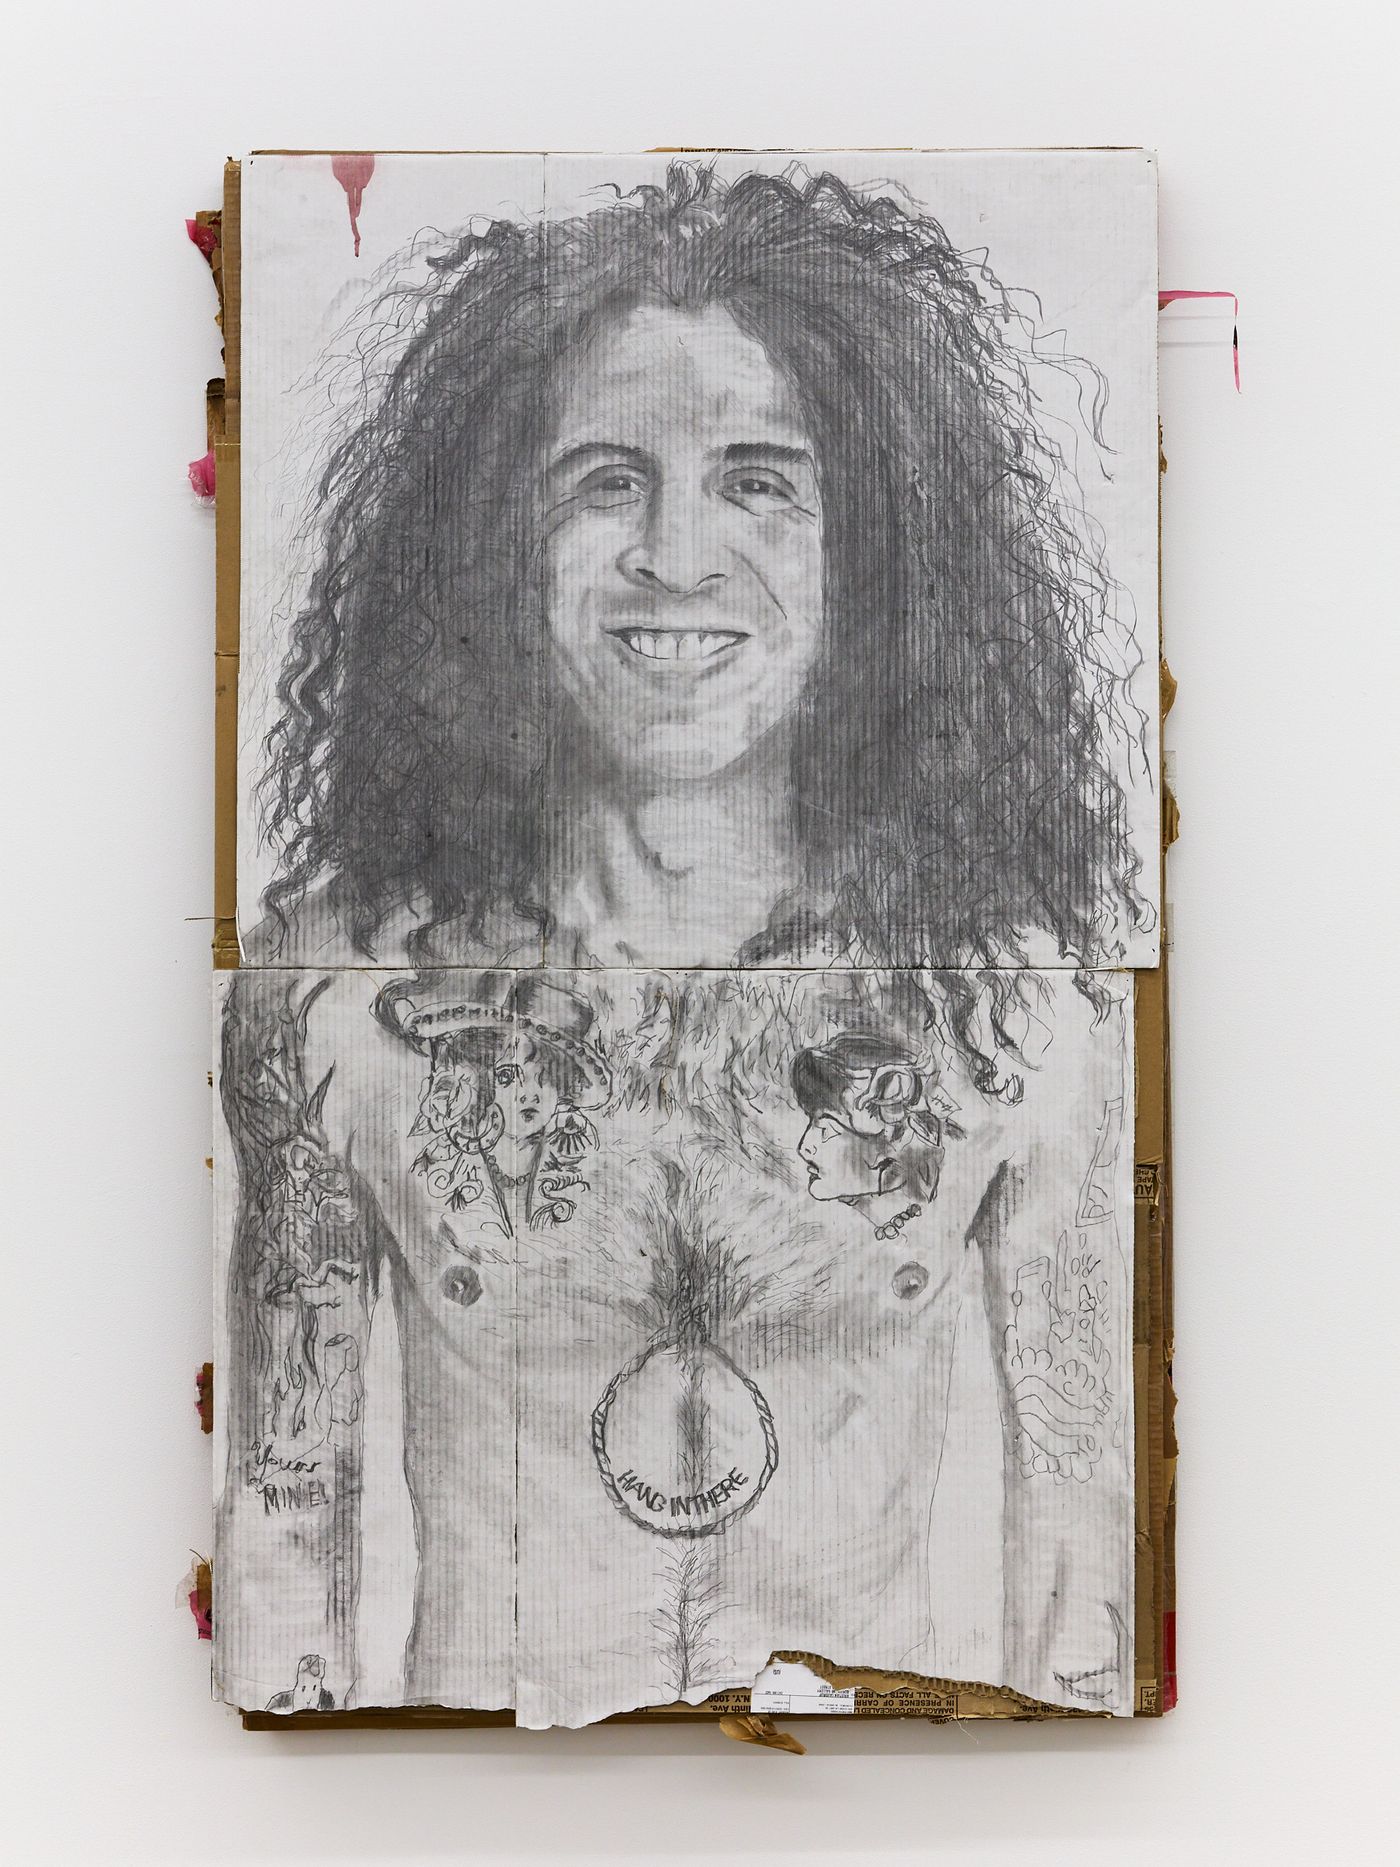 Image of Armando, 2021: Graphite and charcoal on found cardboard